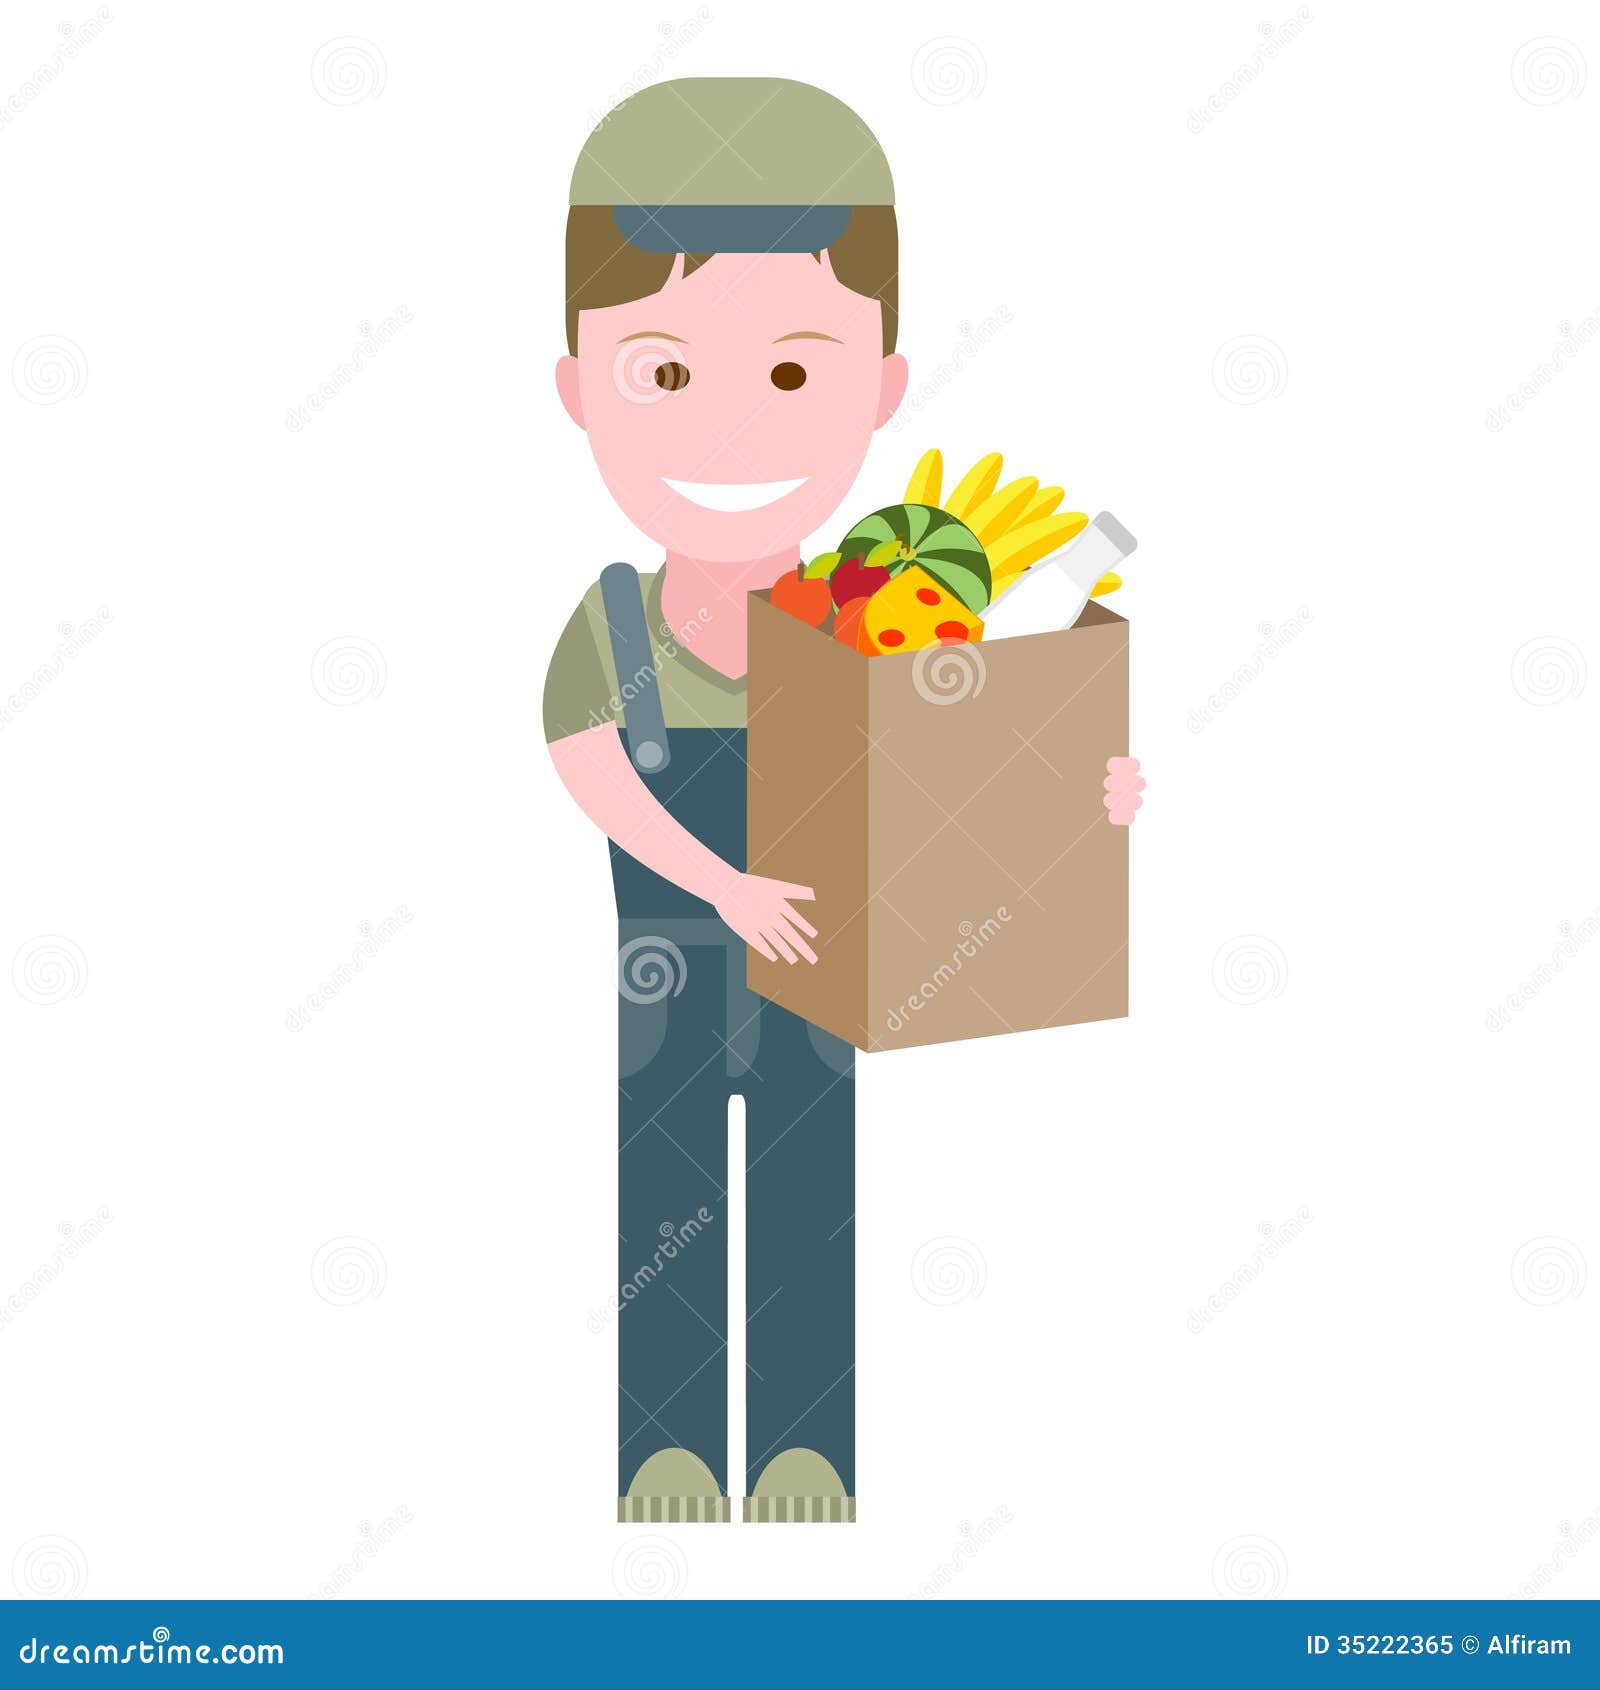 clipart delivery boy - photo #32